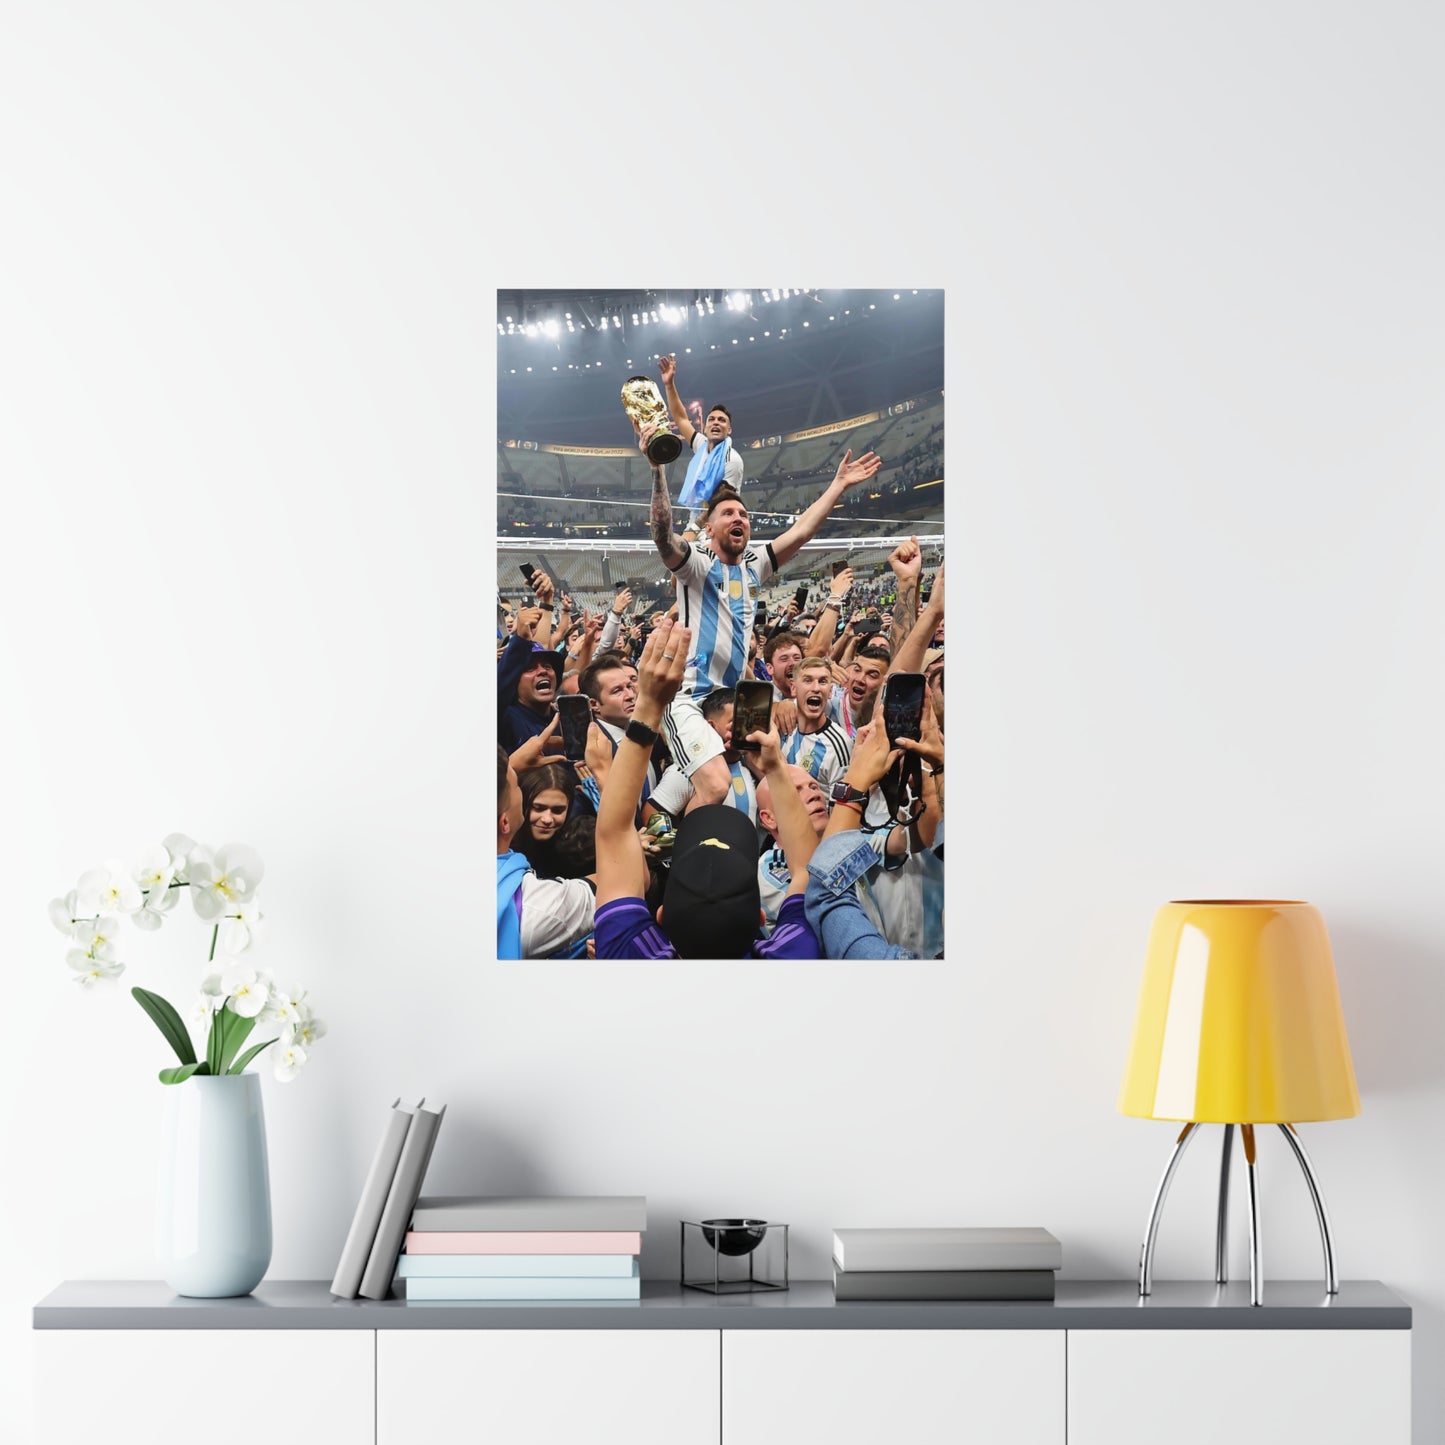 Lionel Messi Lifting World Cup Trophy In Crowd During Post Game Celebration Poster